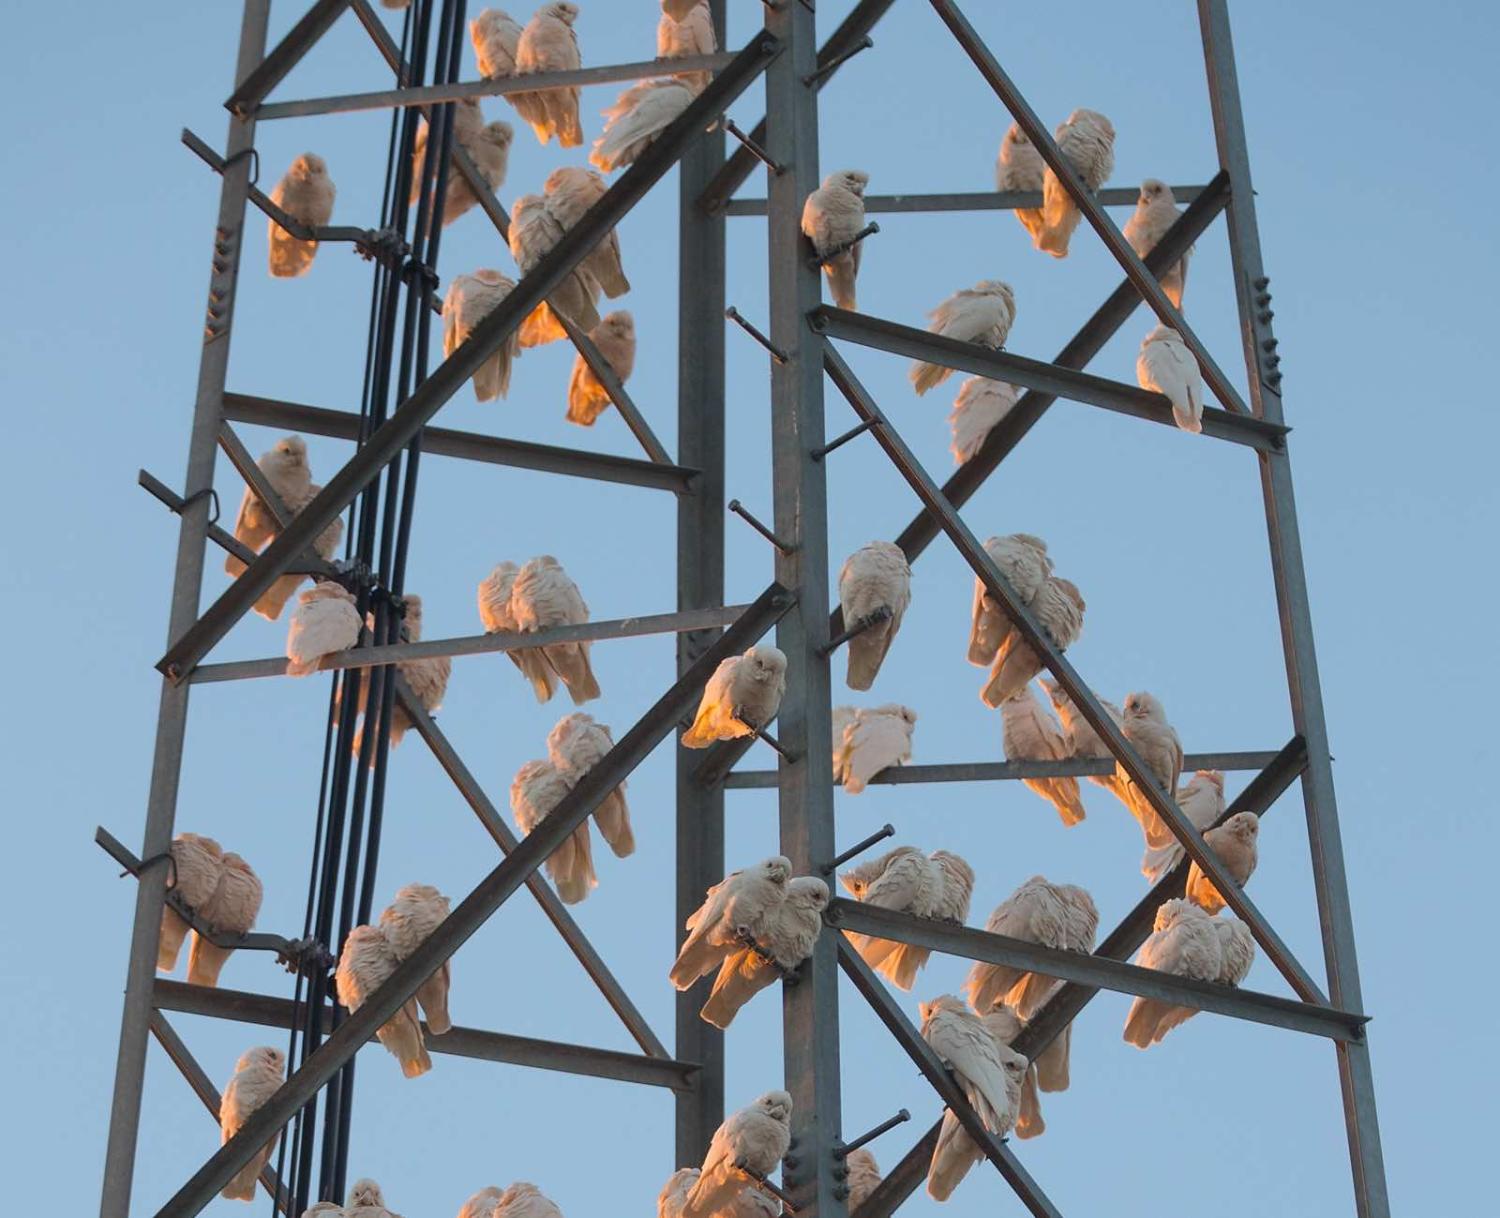 Corellas gather on a telephone tower at dawn in Louth, NSW, Australia (Photo: Mark Evans/Getty Images)